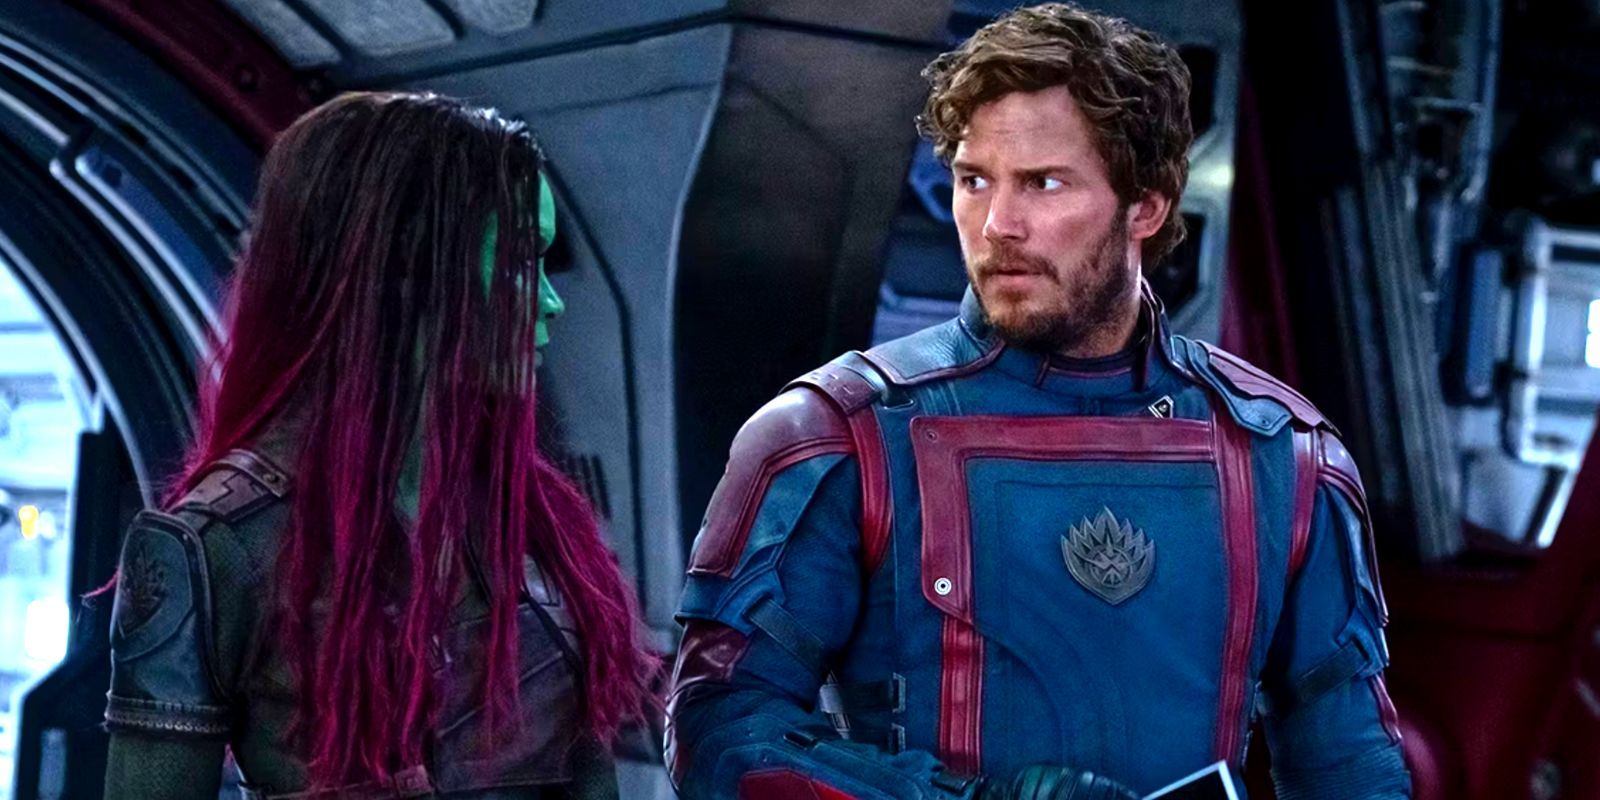 Star-Lord and Gamora share a concerned glance